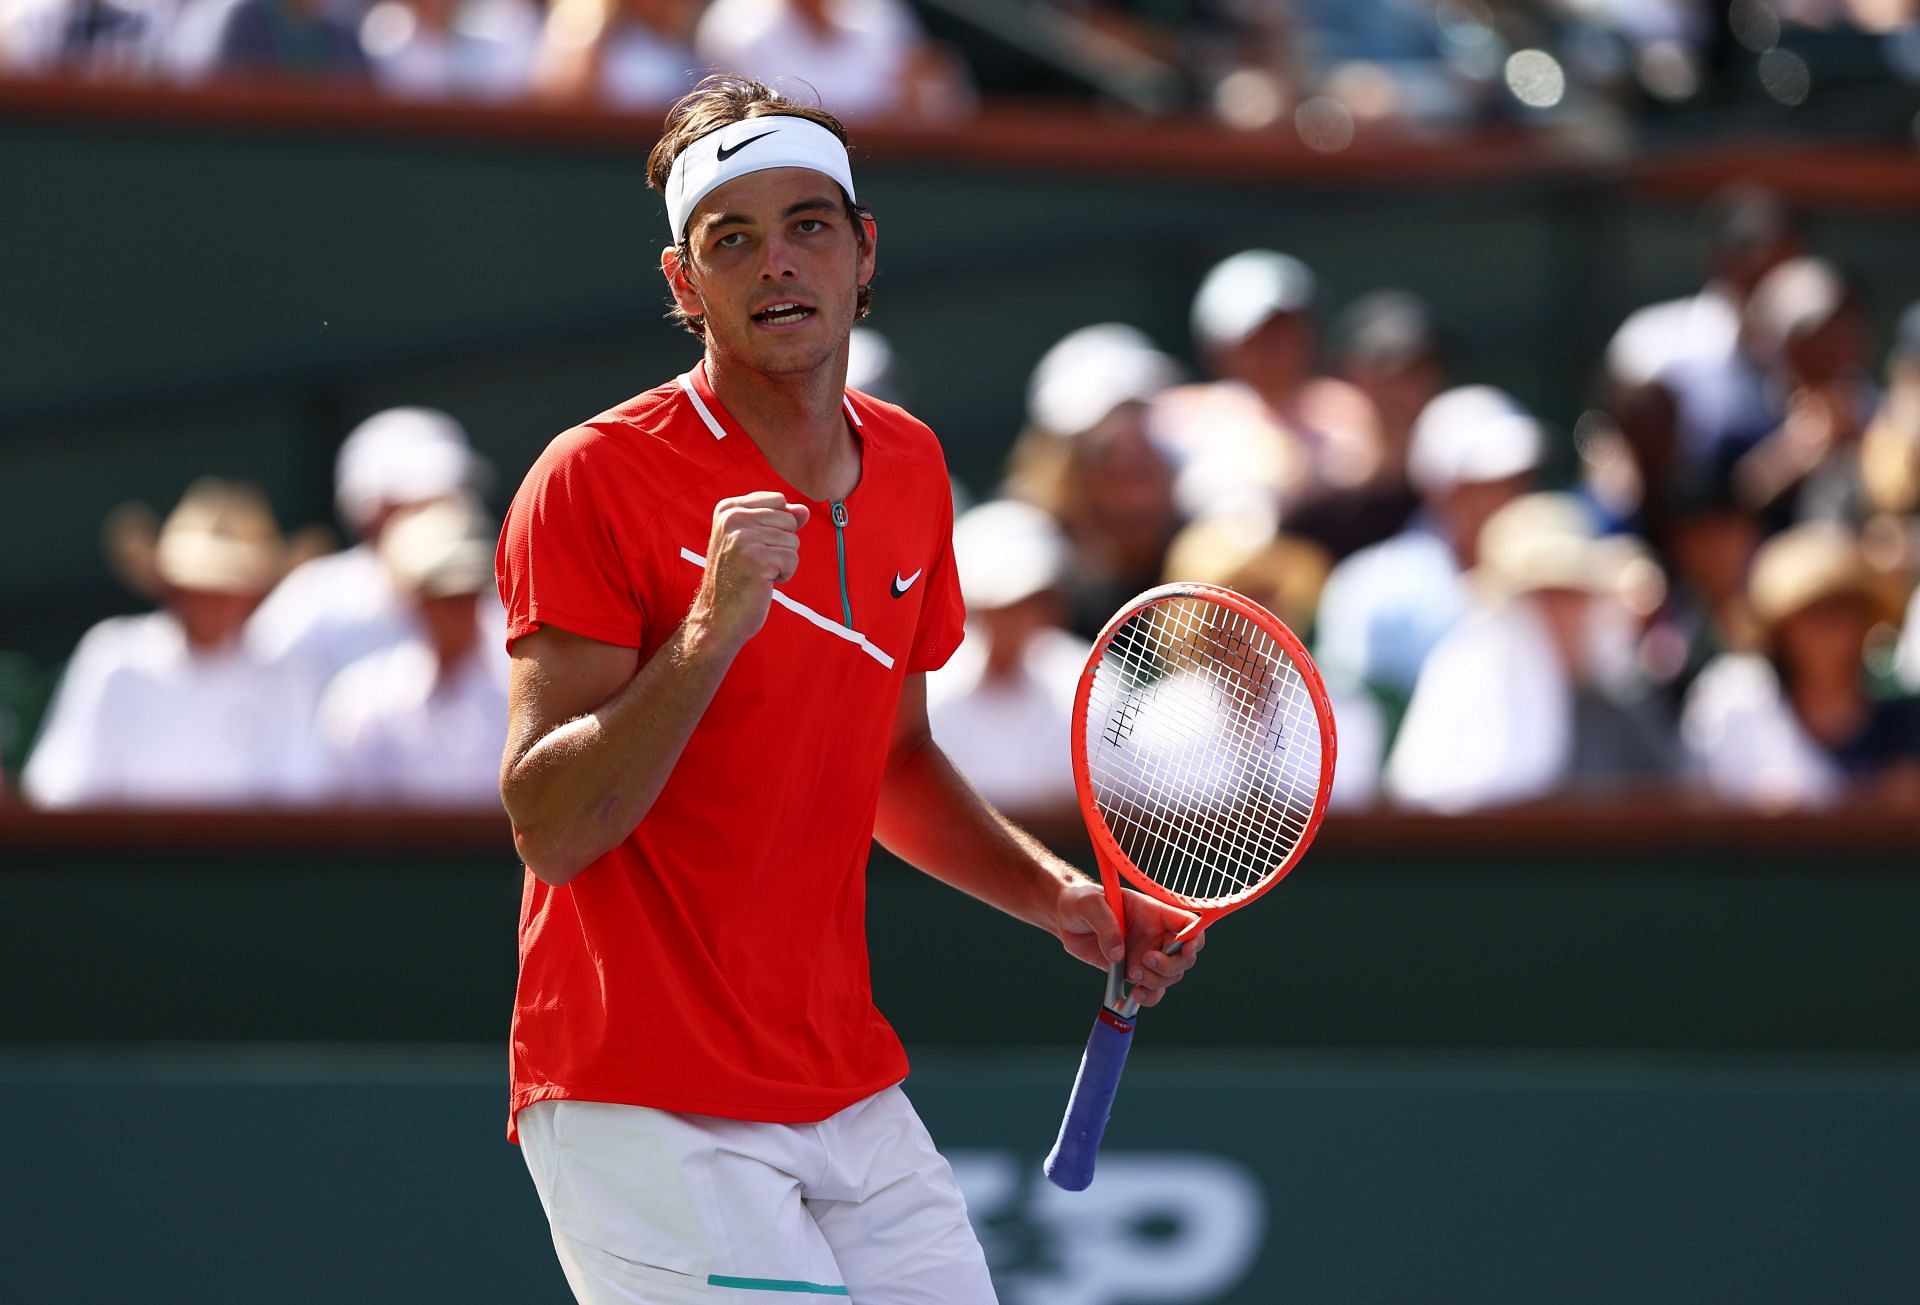 Taylor Fritz in action at the BNP Paribas Open 2022